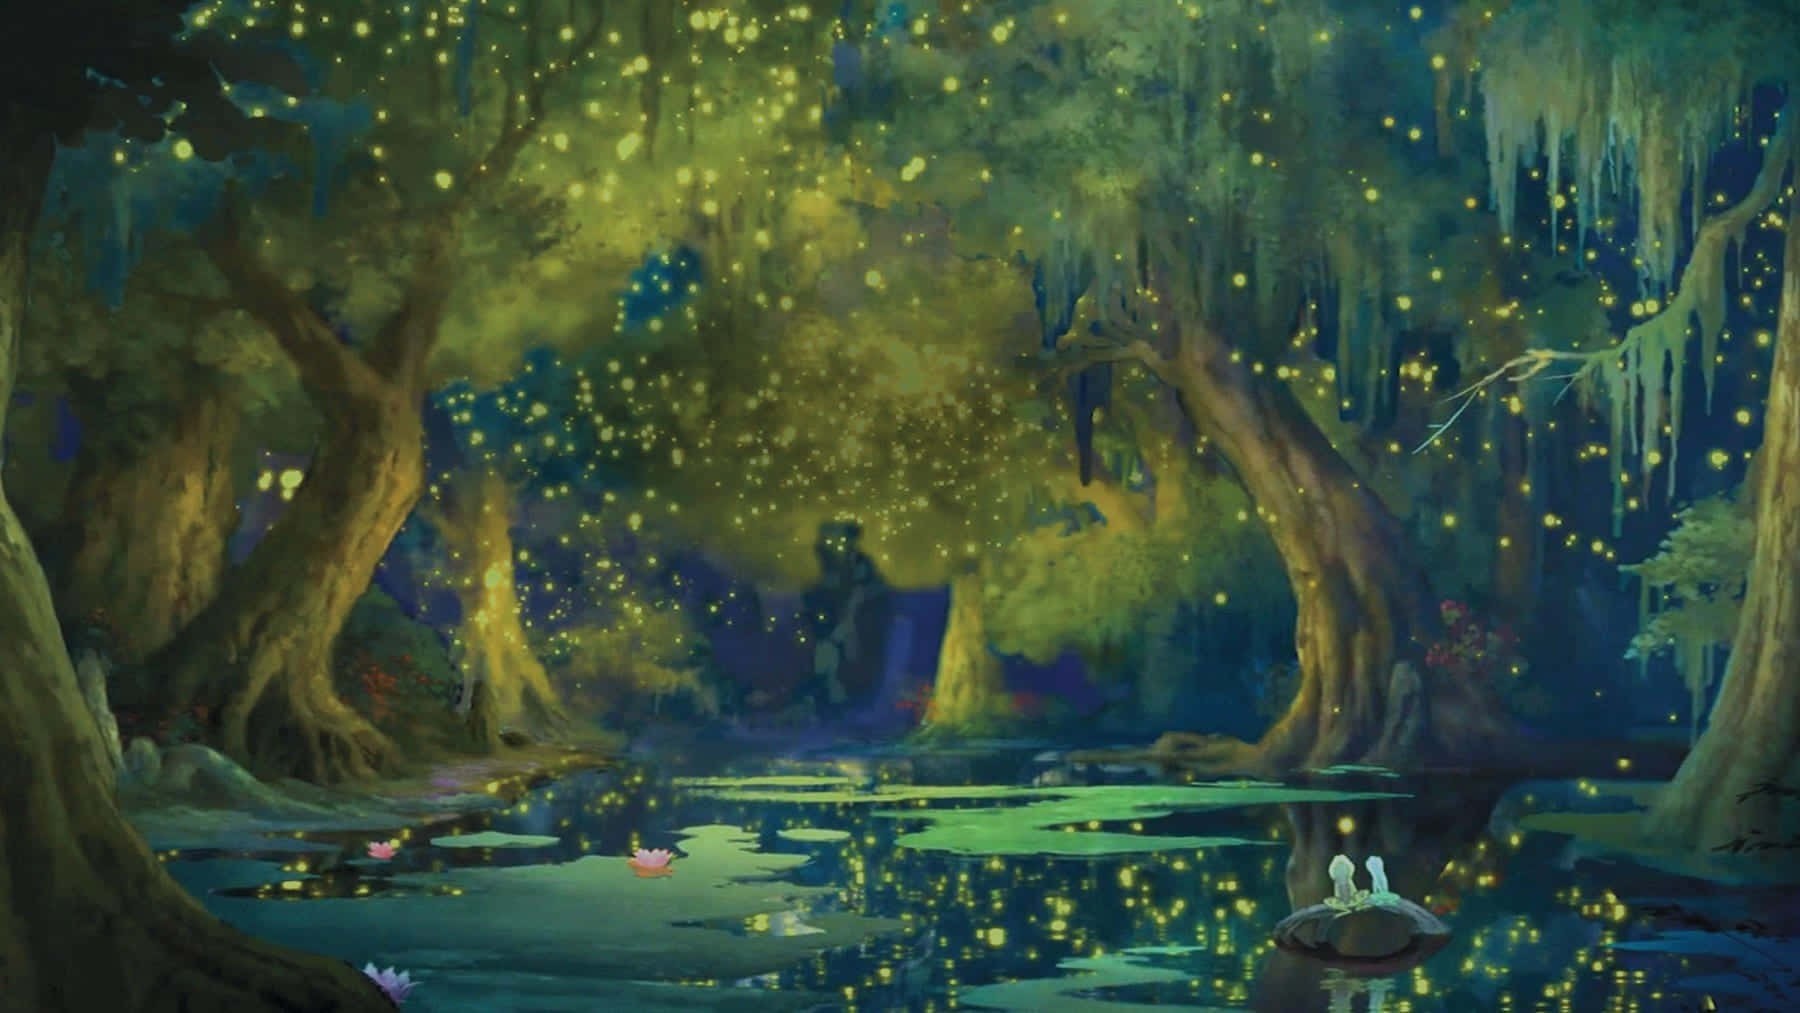 A Painting Of A Forest With Fireflies In The Water